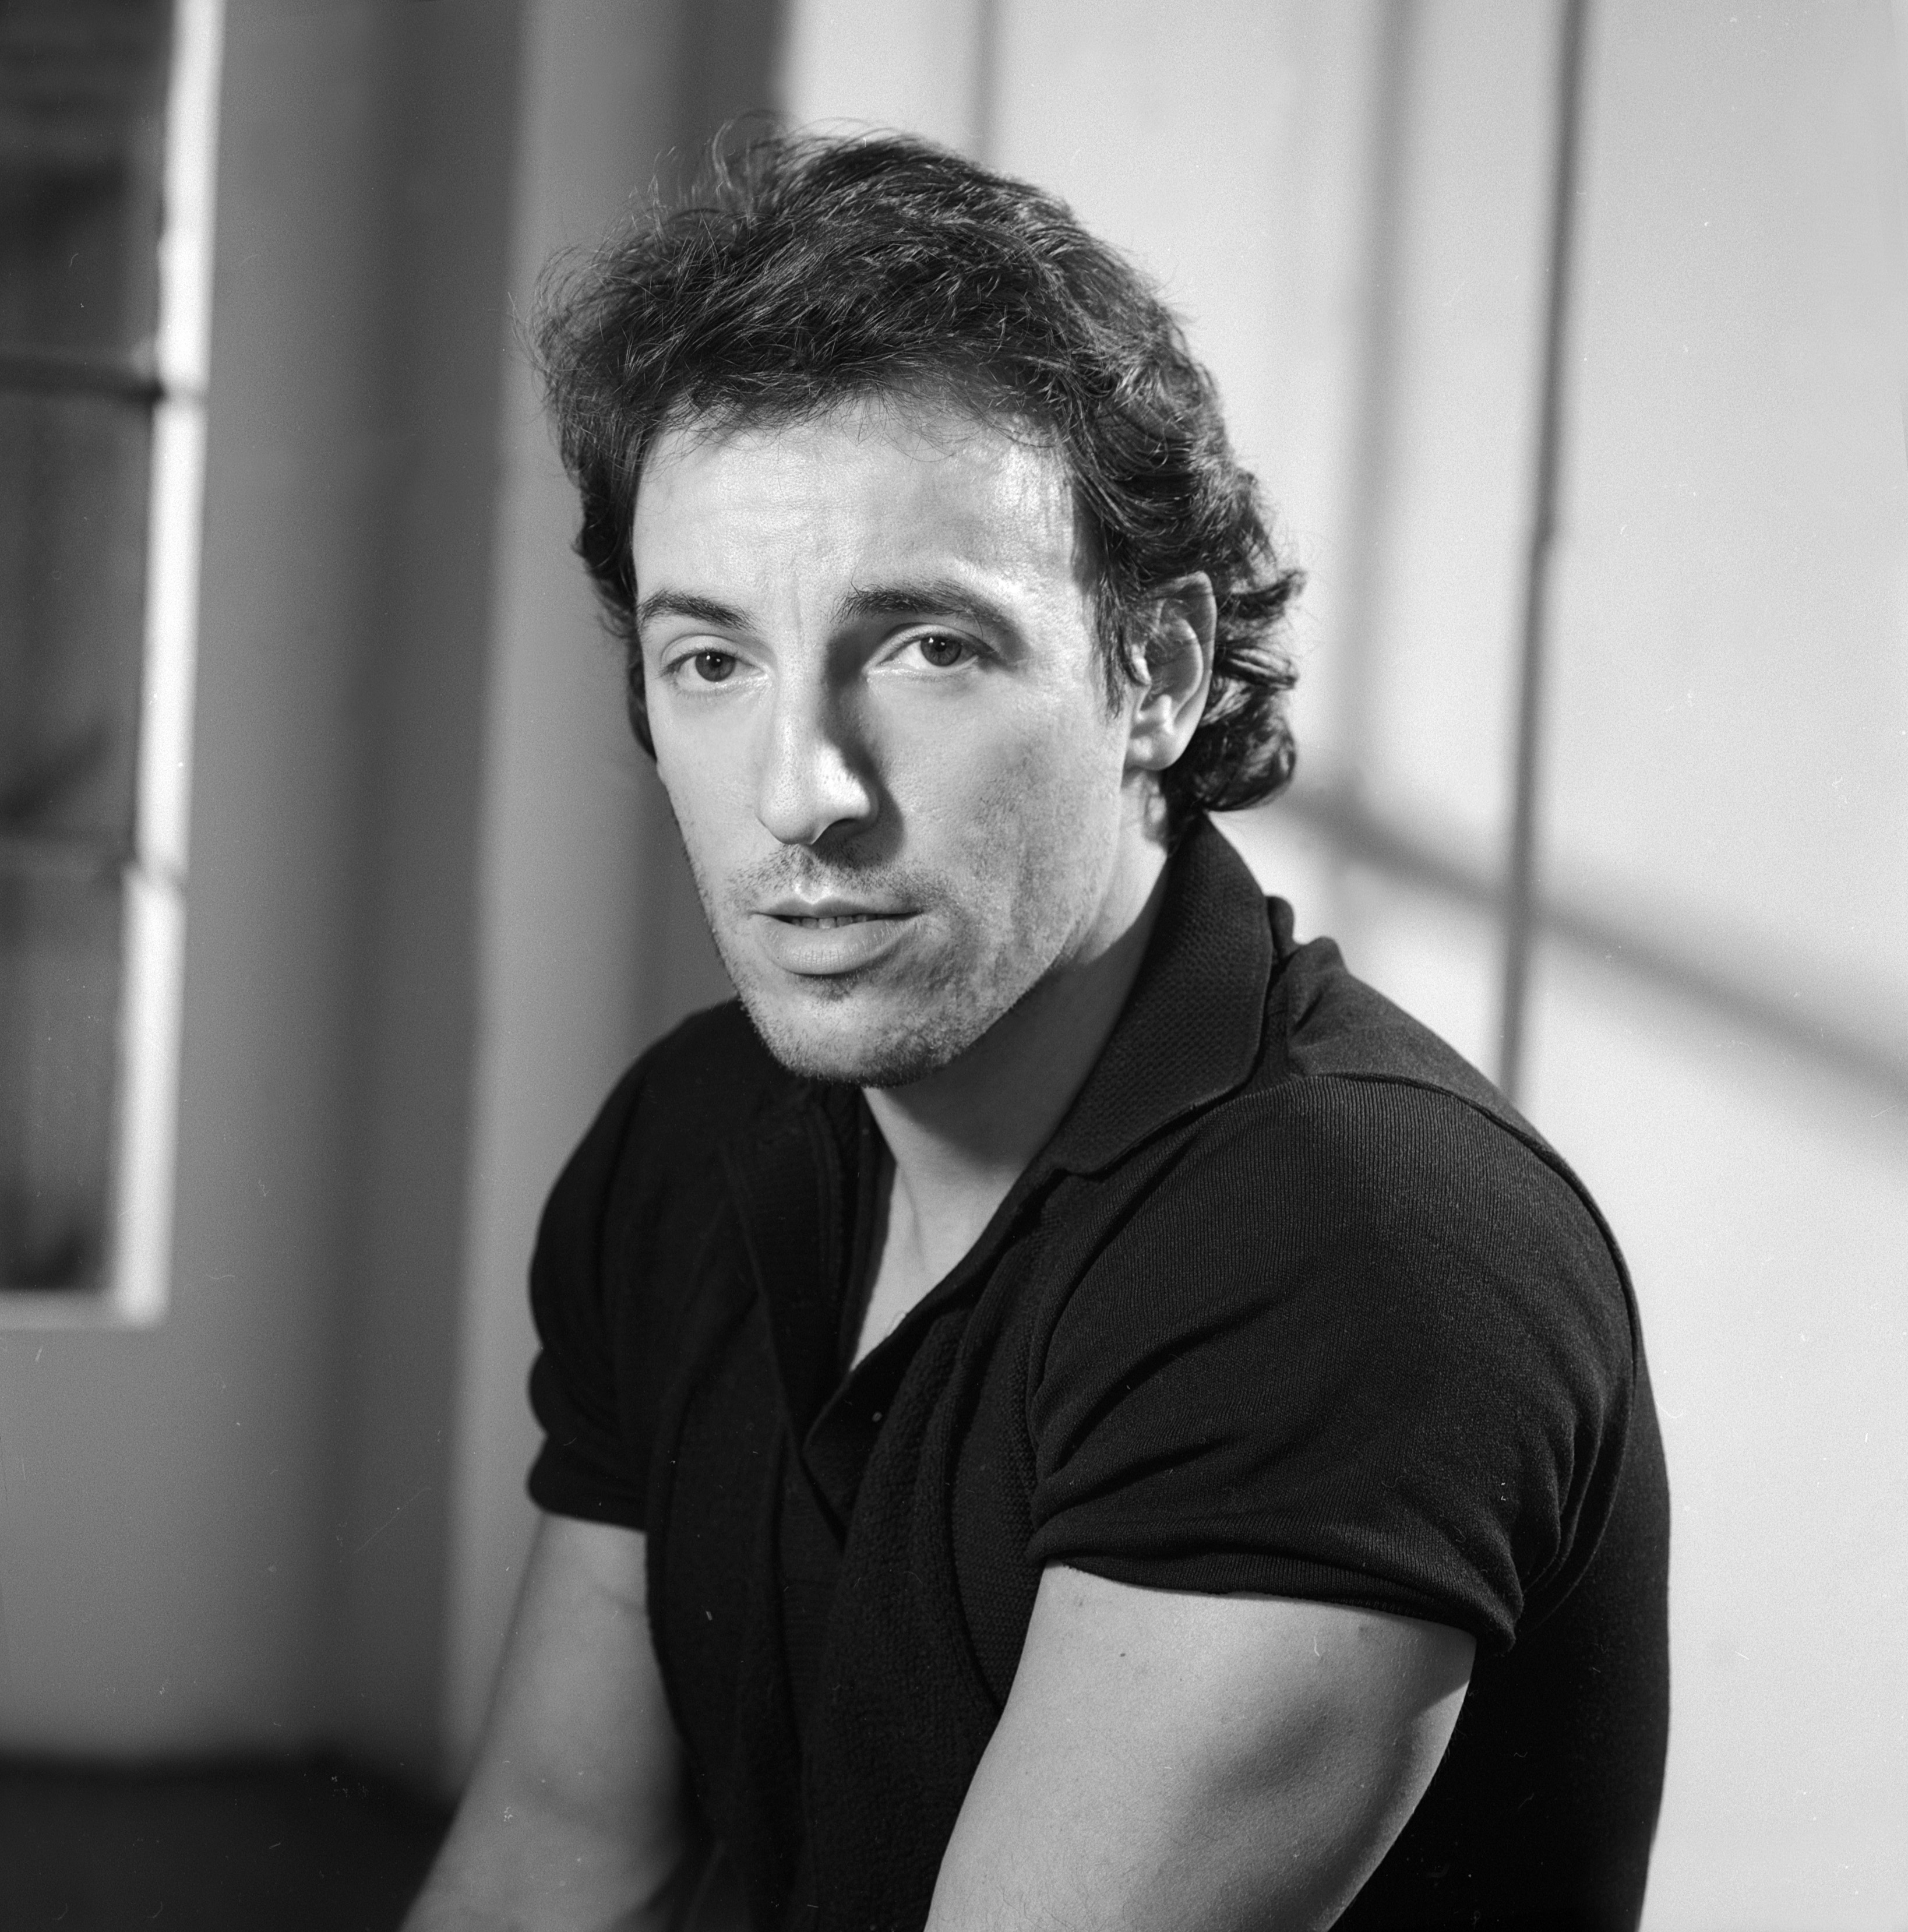 Bruce Springsteen's portrait taken in New York City in 1988. | Source: Getty Images